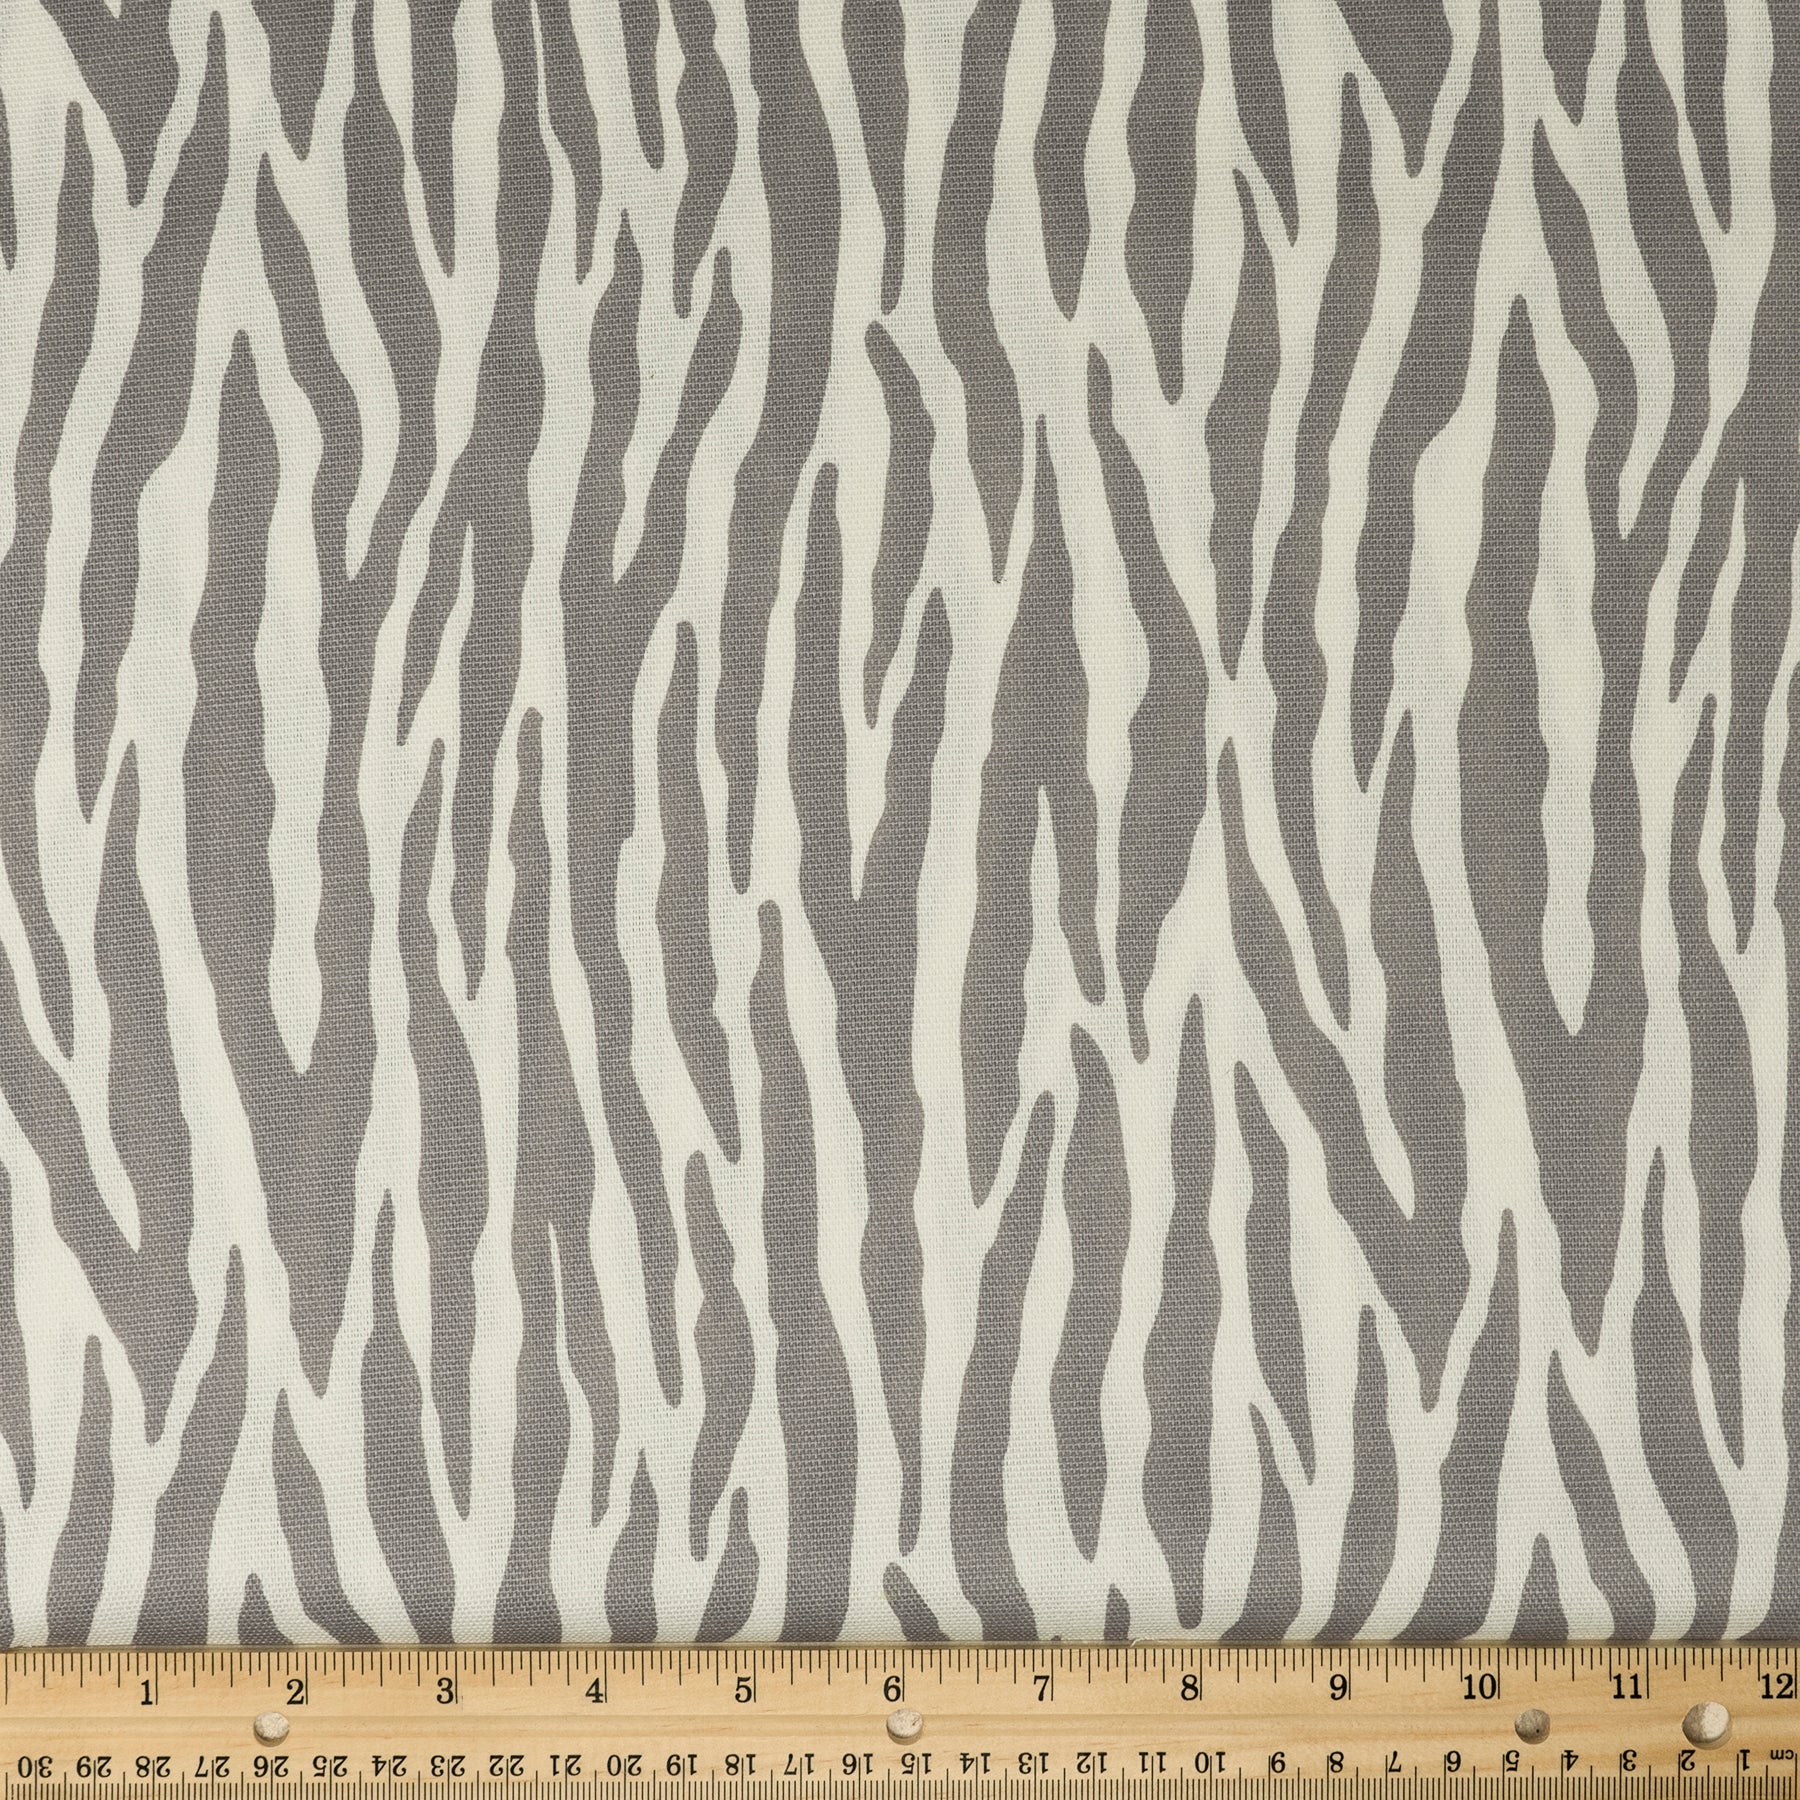 Waverly Inspirations 100% Cotton Duck 45" Width Zebra Grey Color Sewing Fabric by the Yard